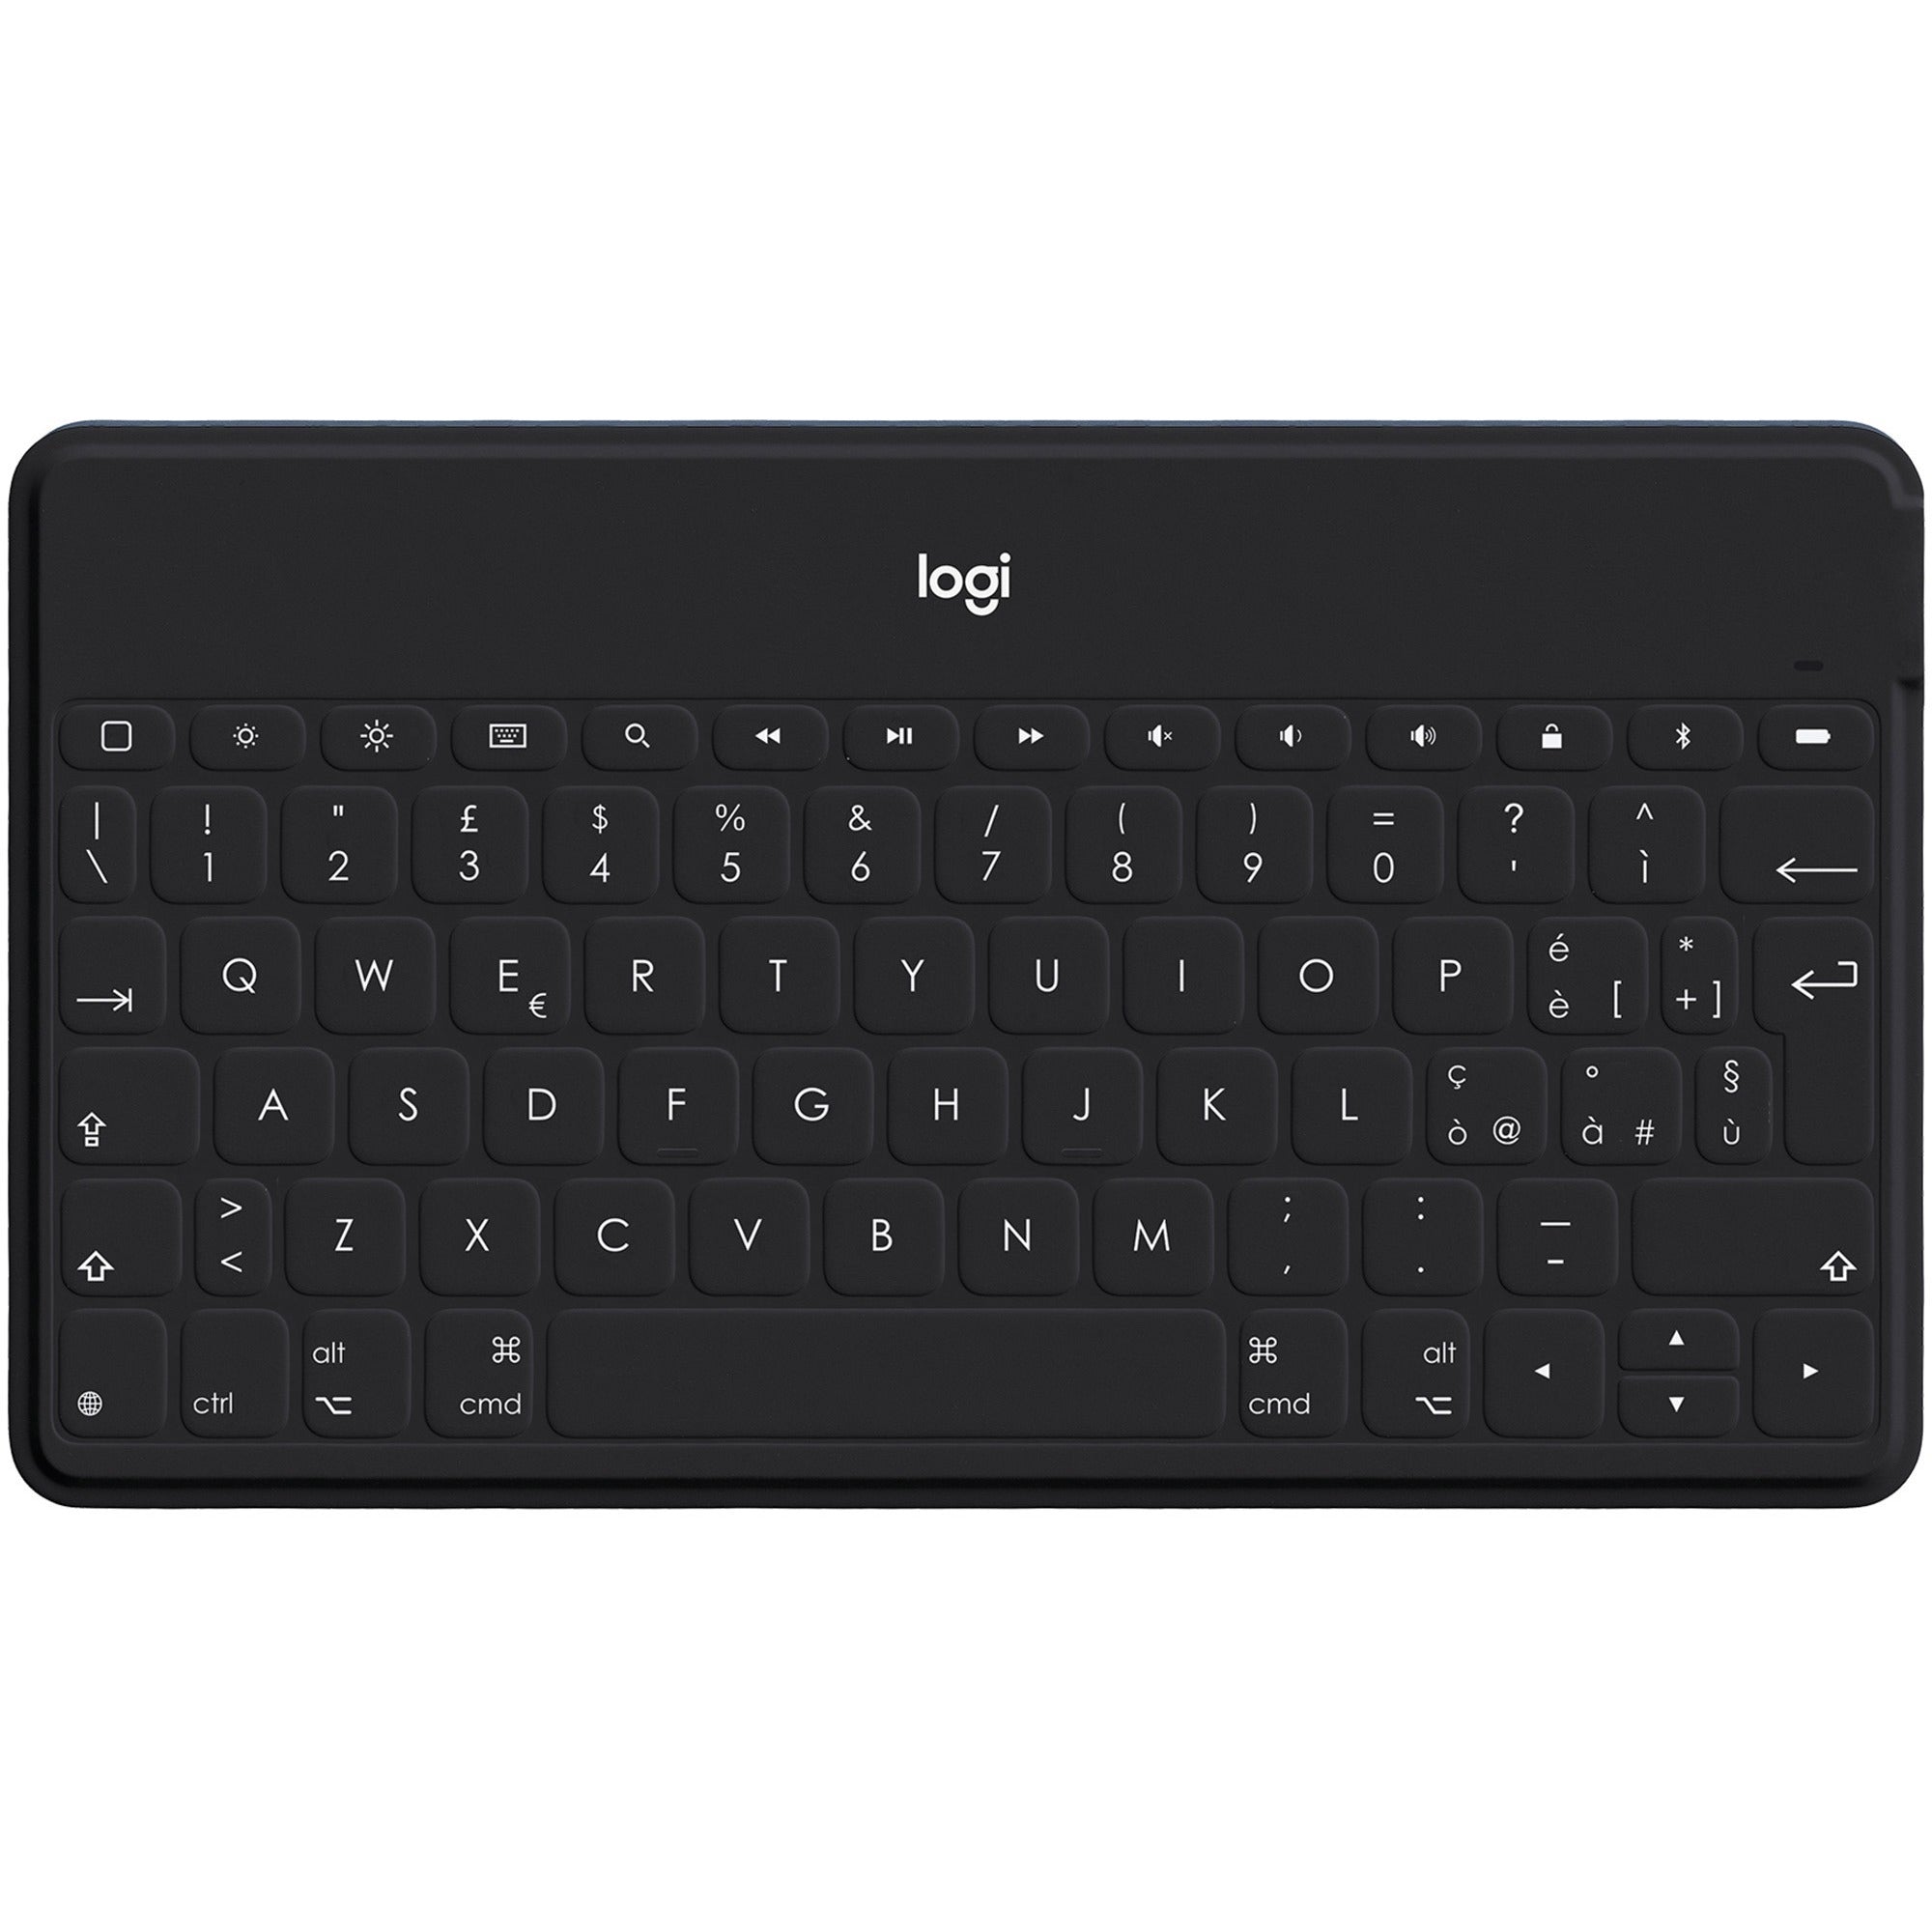 keys-to-go-super-slim-and-super-light-bluetooth-keyboard-for-iphone-ipad-and-apple-tv-black-wireless-connectivity-bluetooth-tablet-smartphone-smart-tv-tablet-smartphone-iphone-ipad-apple-tv-mechanical-keyswitch-black_log920006701 - 1